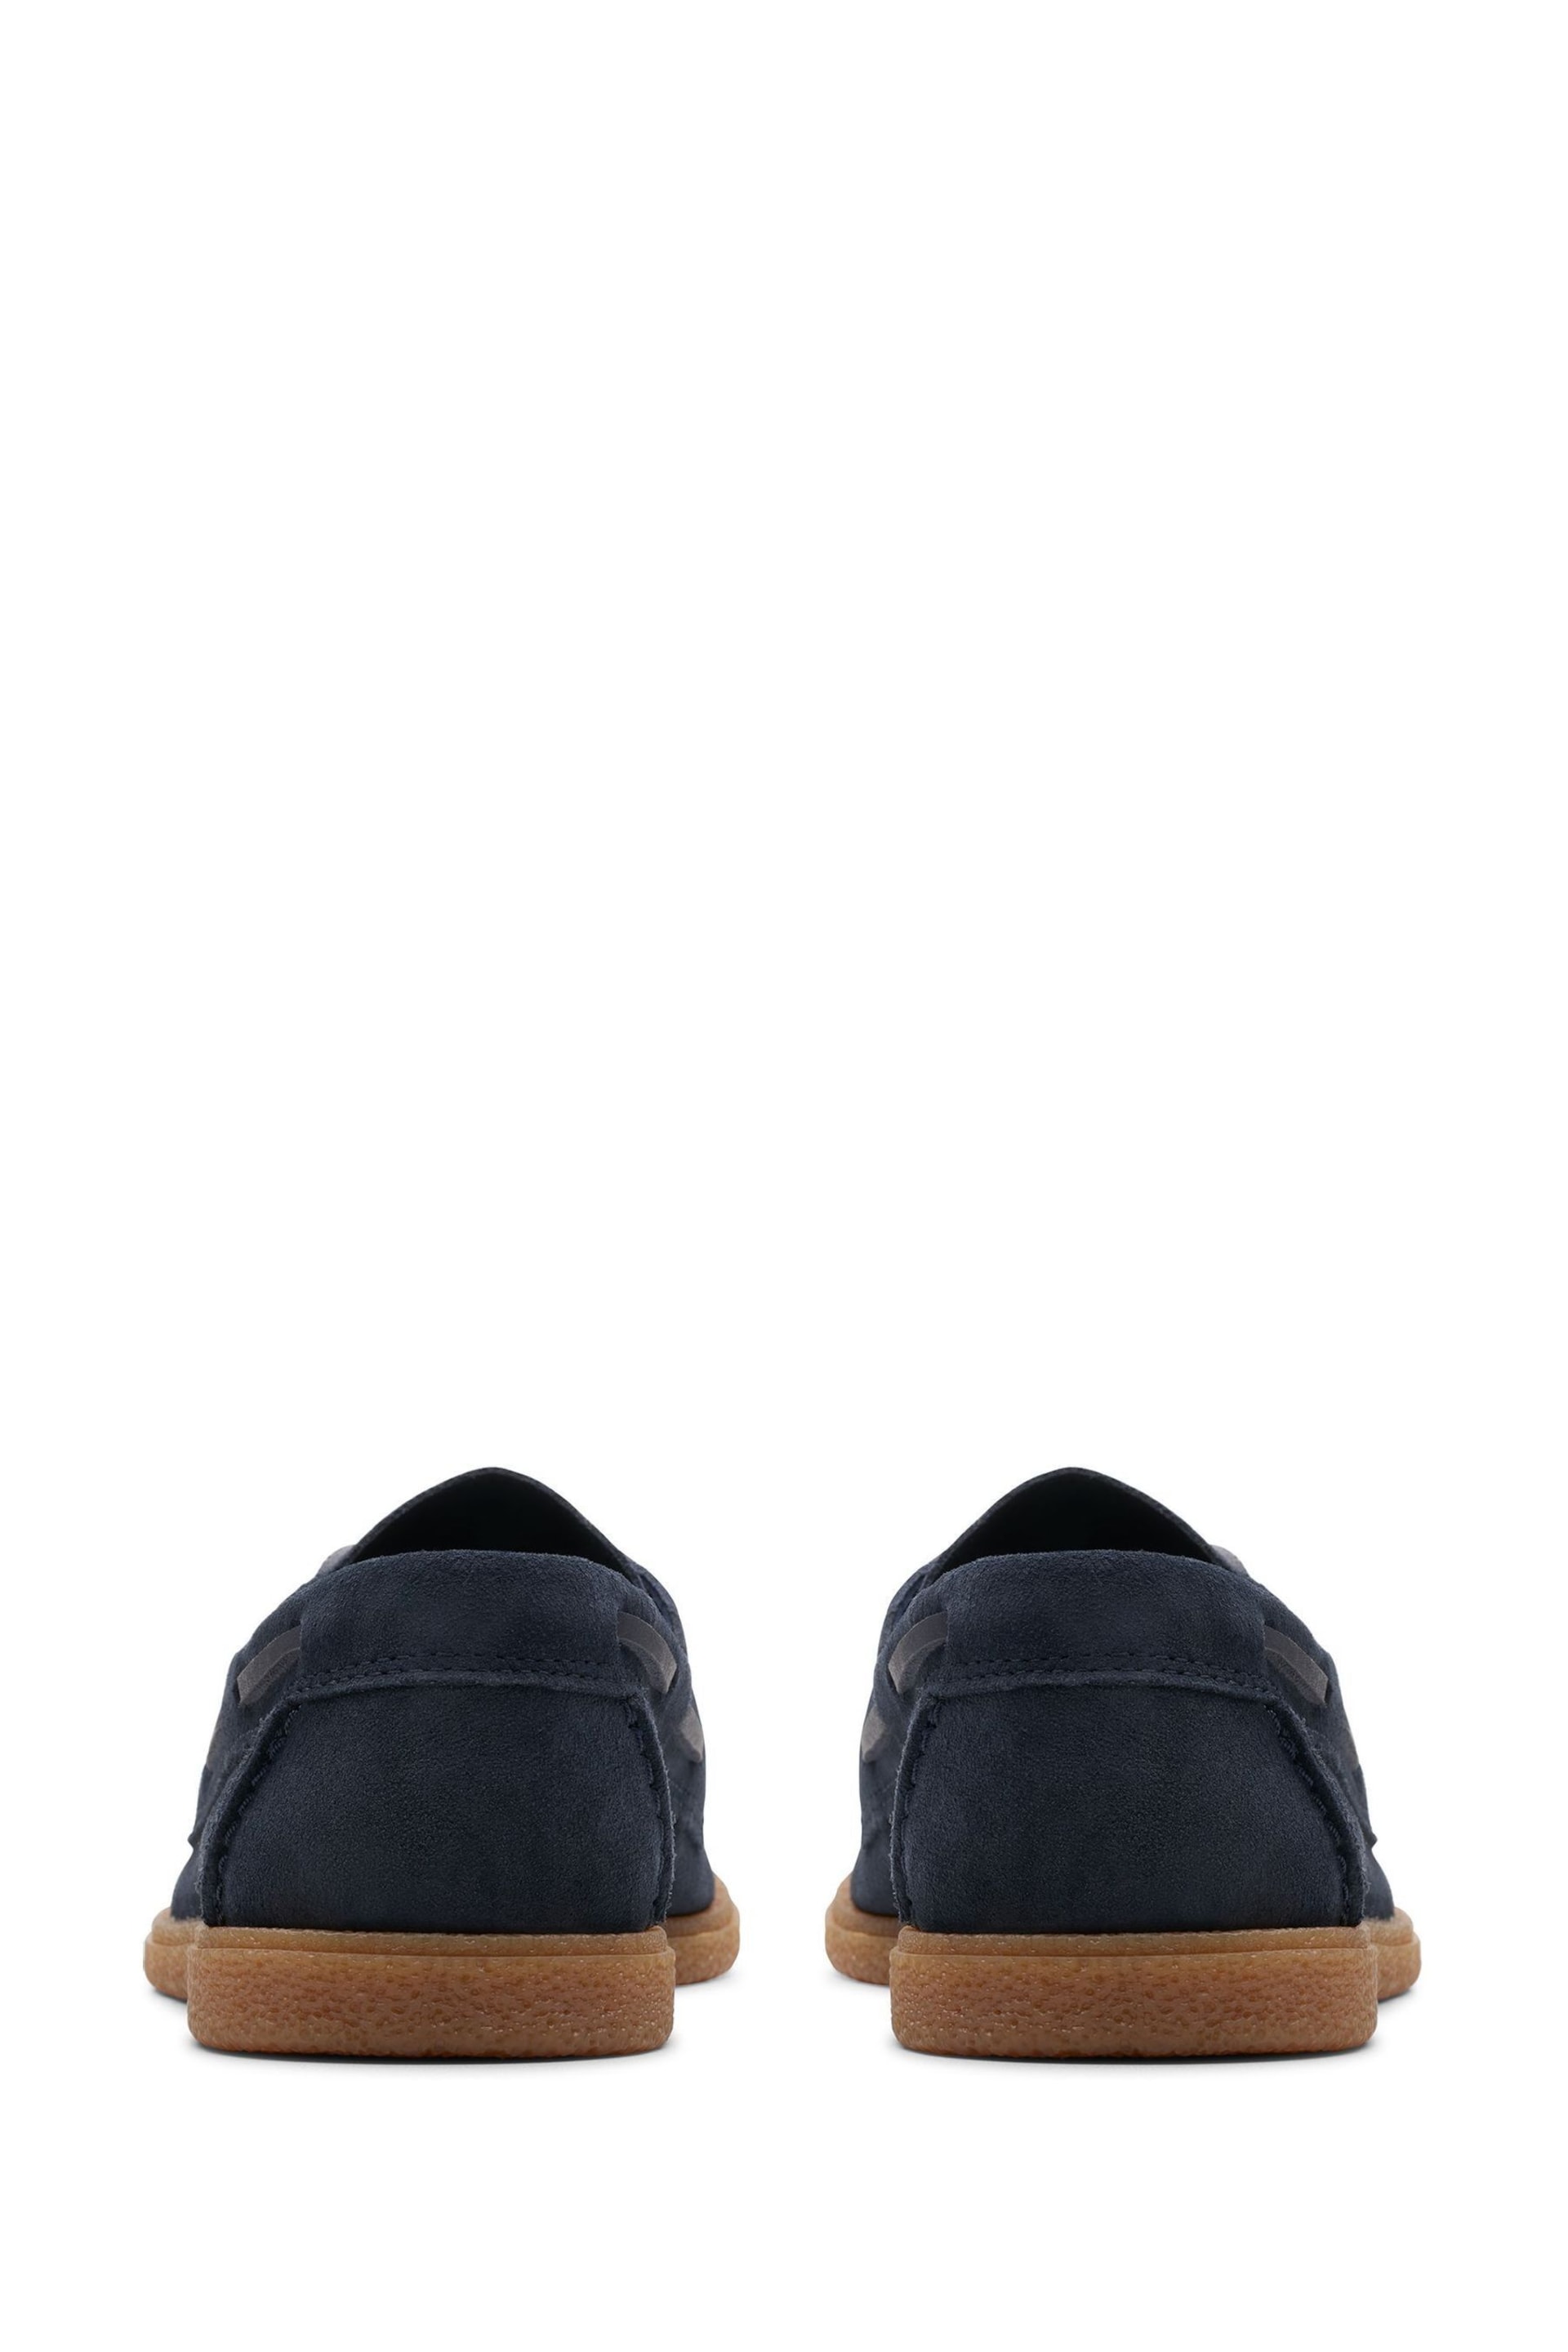 Clarks Blue Suede Clarkbay Go Shoes - Image 4 of 6